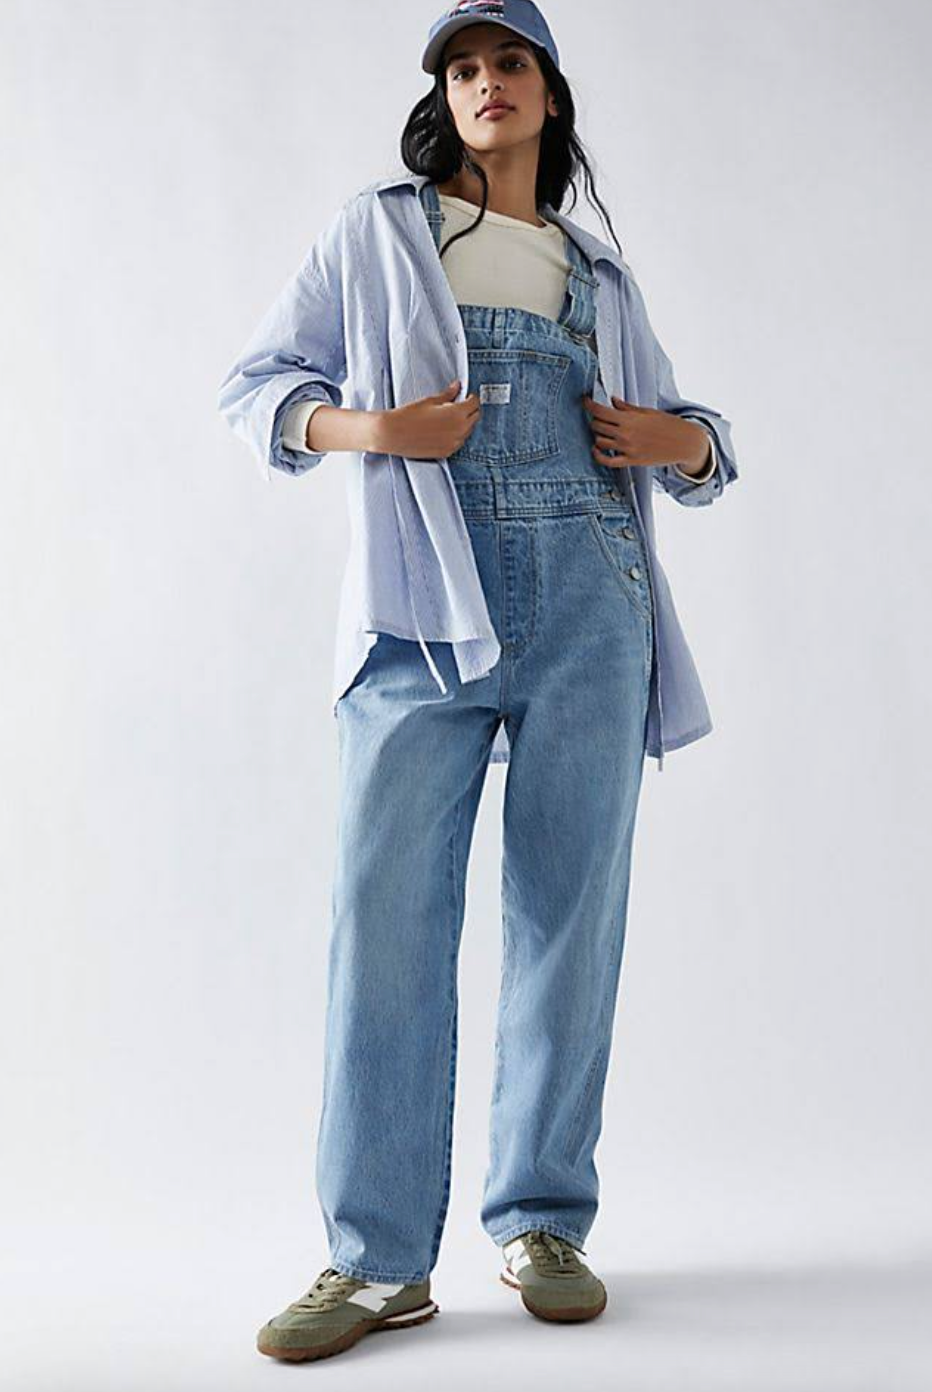 Levi's Vintage Overalls - What A Delight